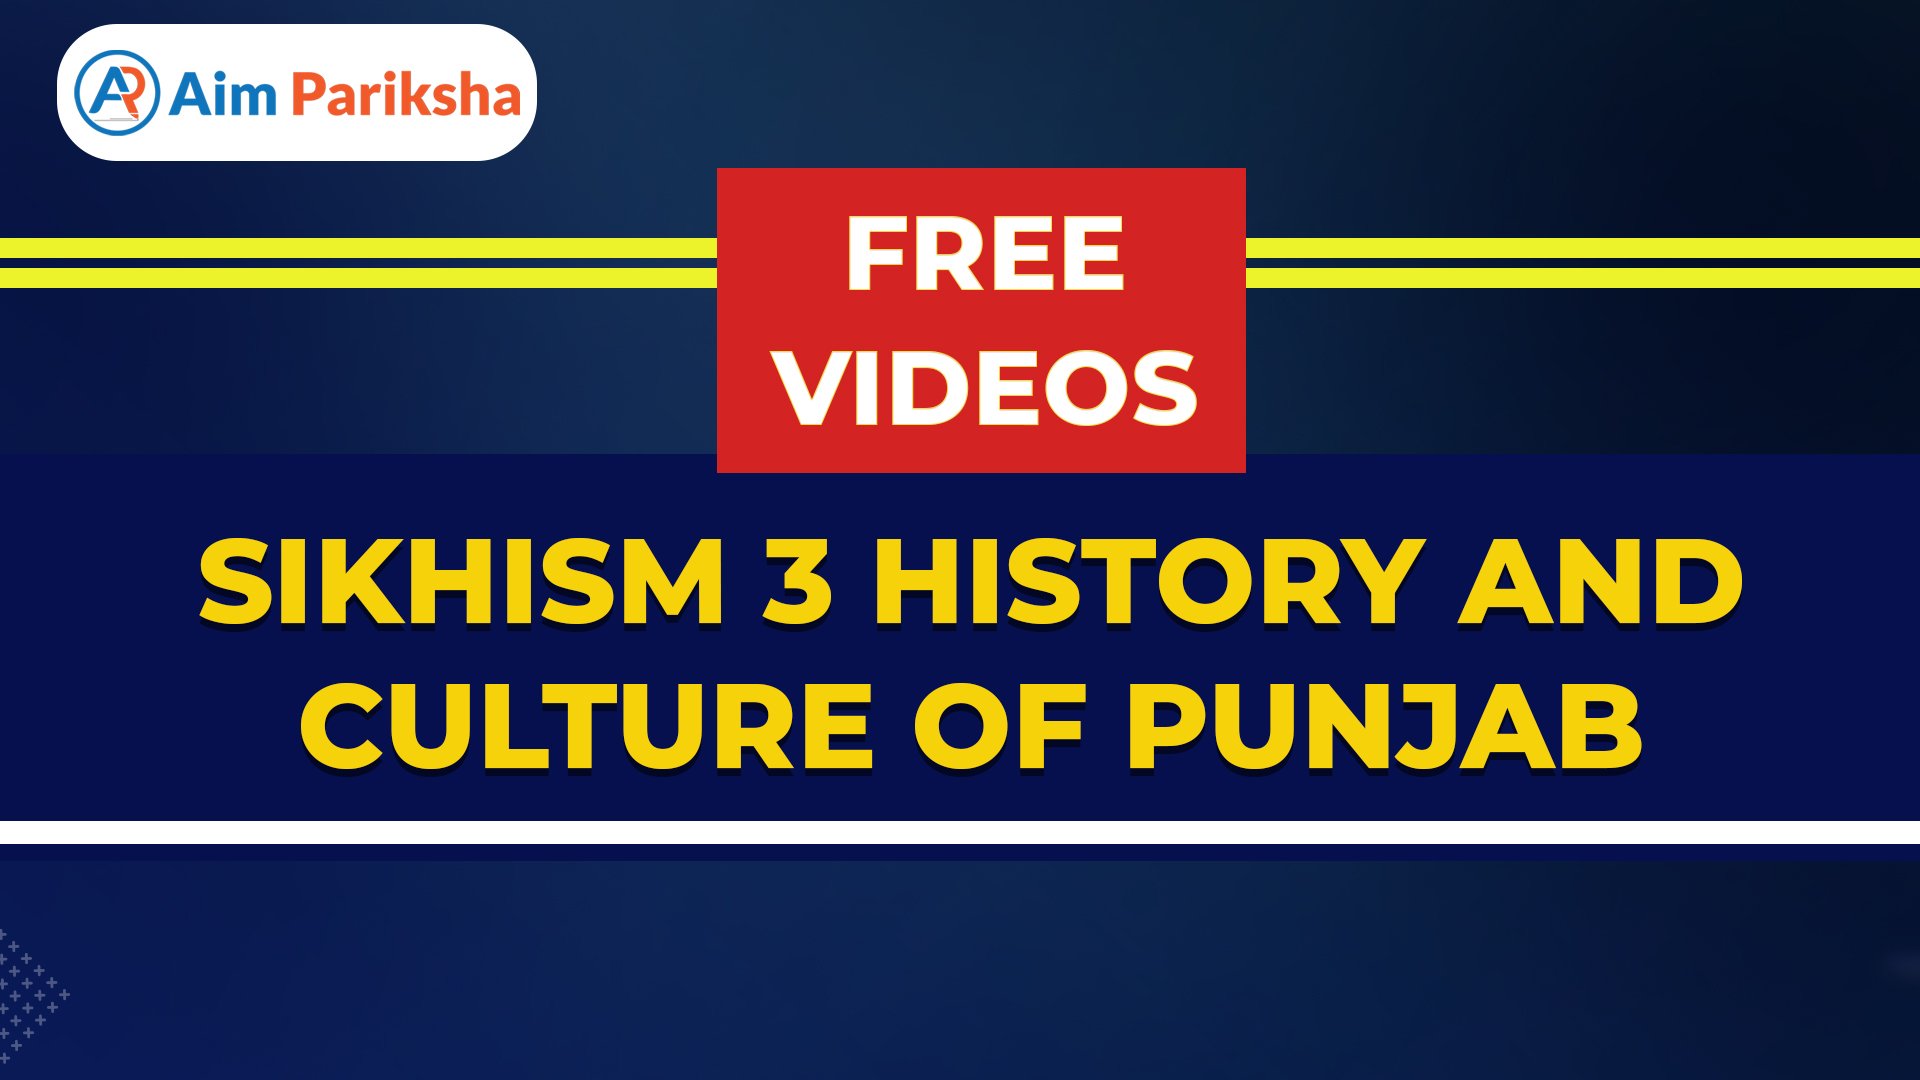 SIKHISM 3 HISTORY AND CULTURE OF PUNJAB